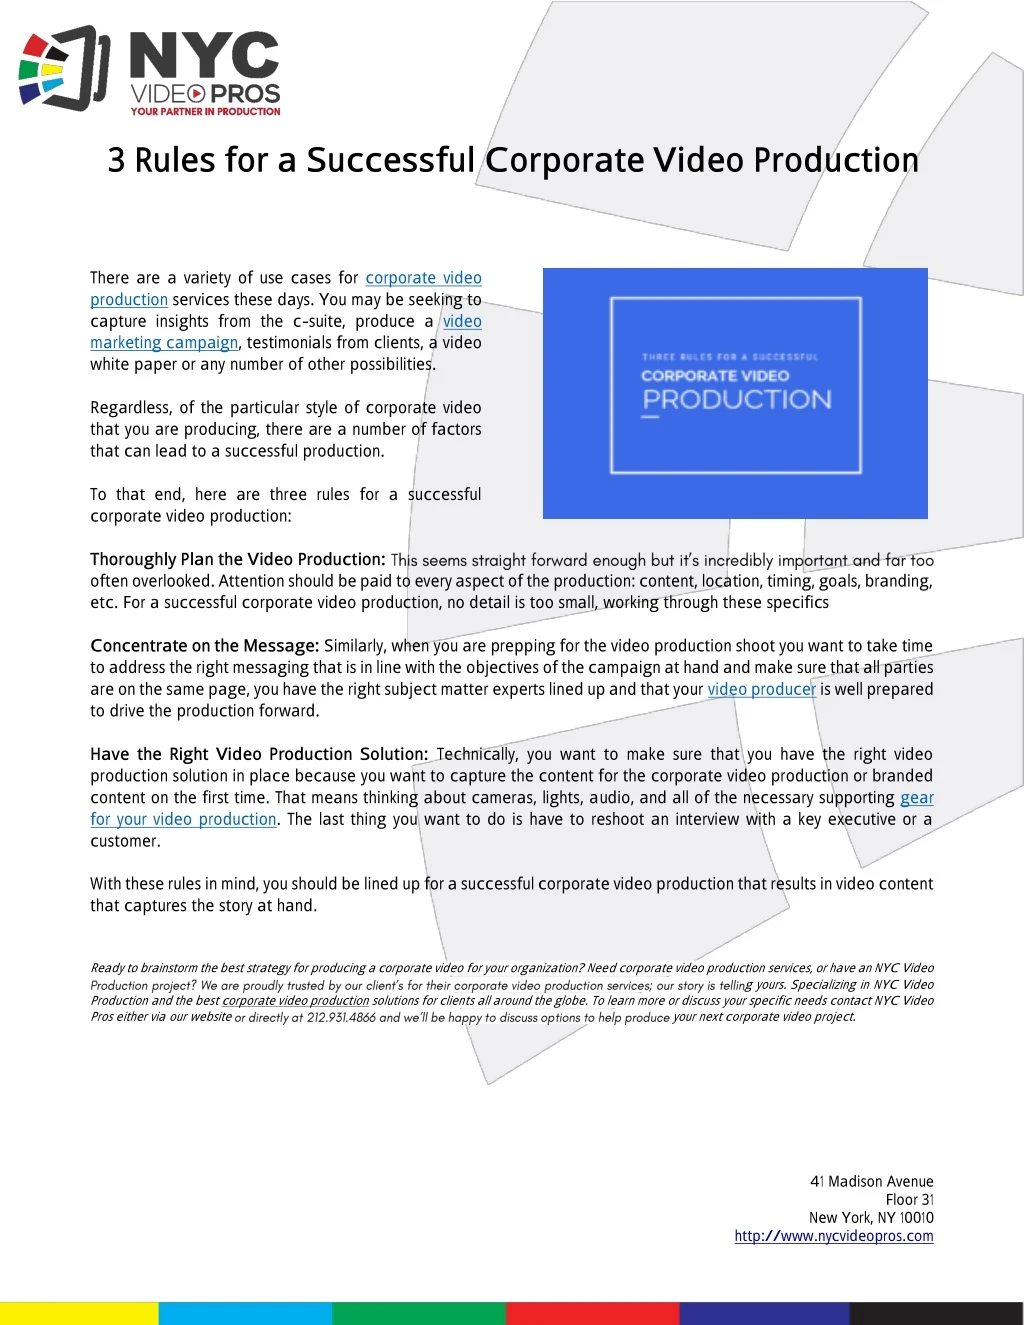 3 rules for a successful corporate video